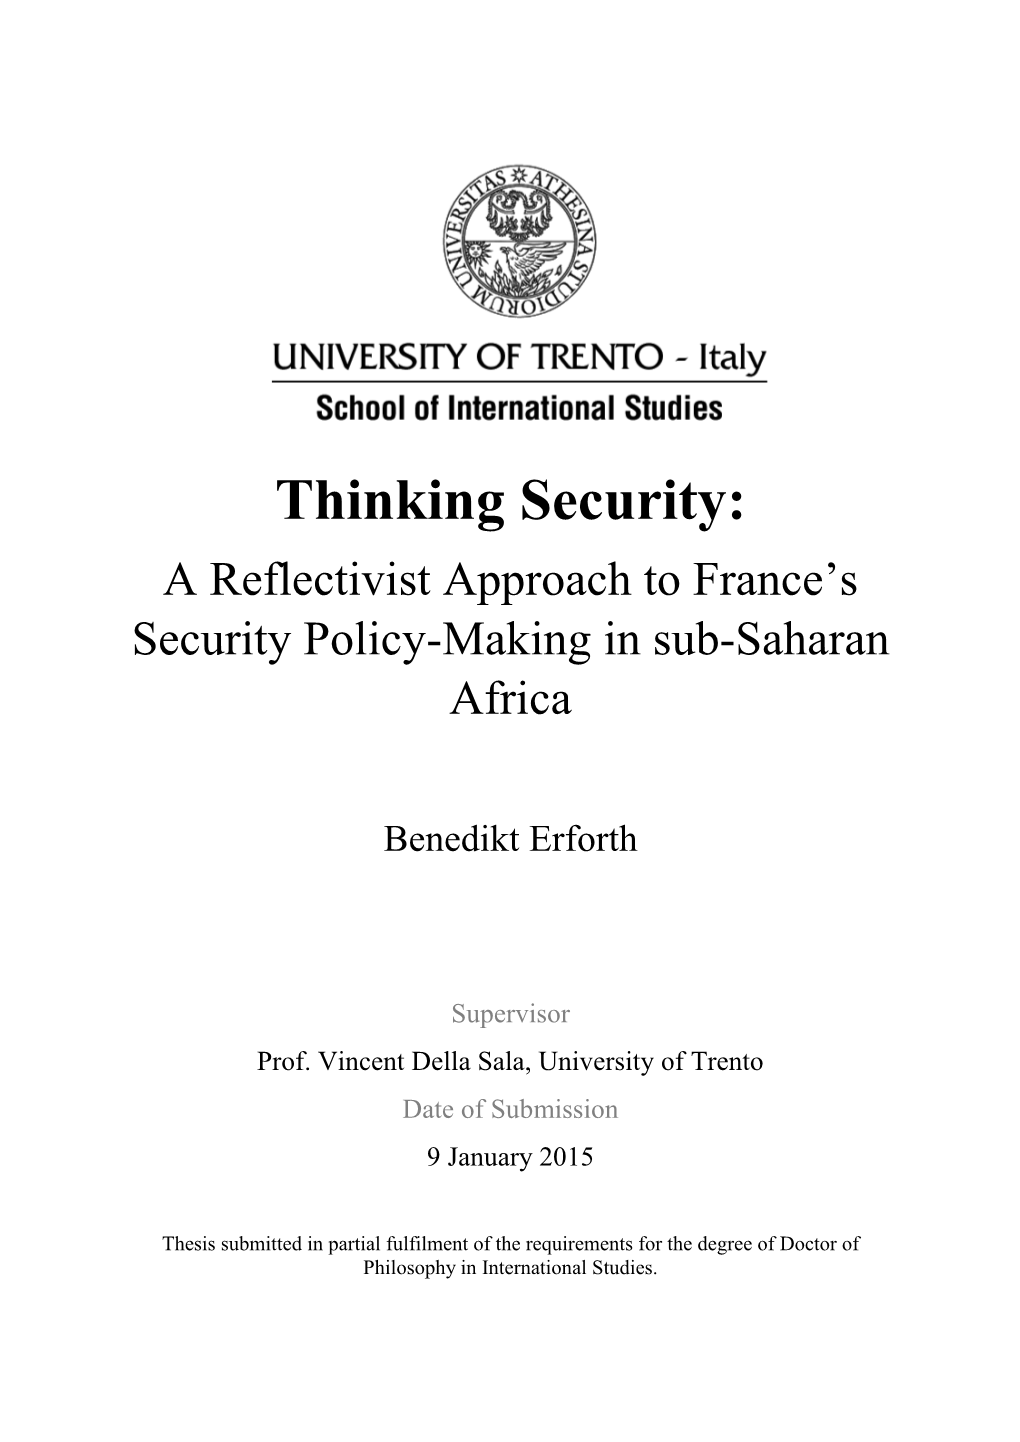 Thinking Security: a Reflectivist Approach to France’S Security Policy-Making in Sub-Saharan Africa